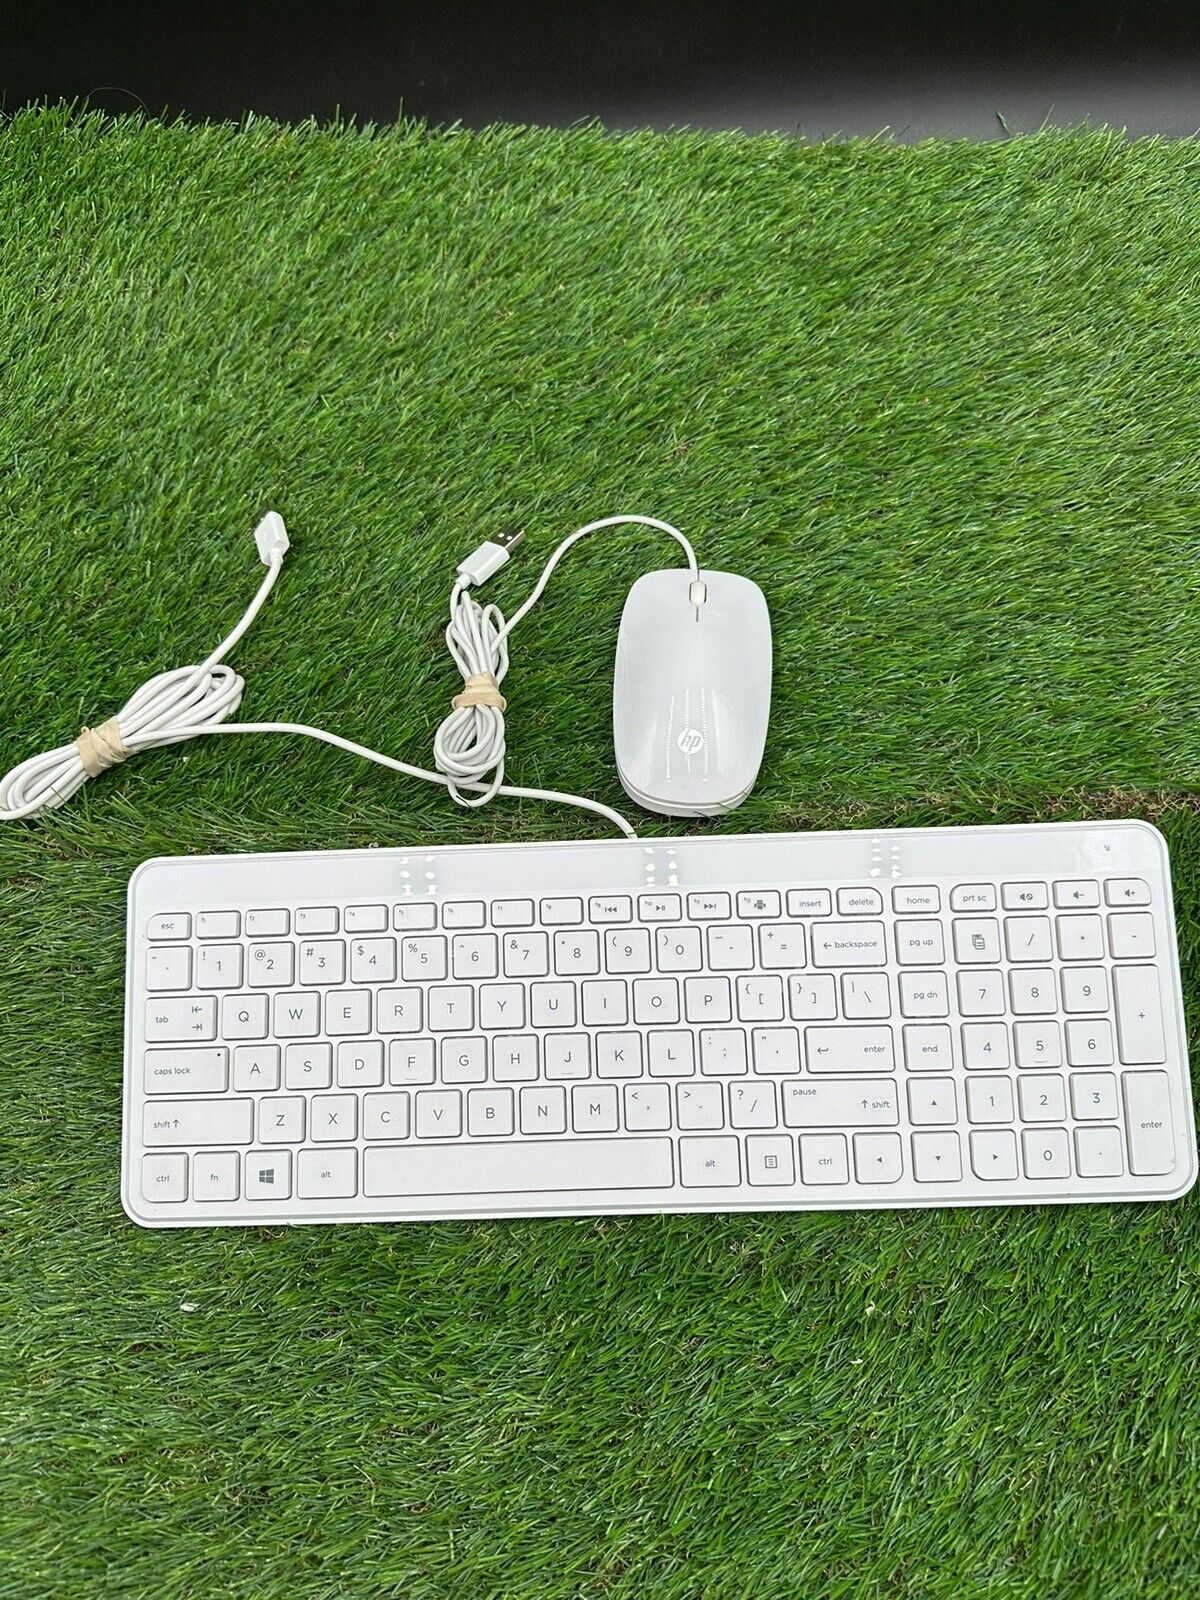 HP USB Multi Media White Slim Wired Keyboard SK-2028 With Wired Mouse